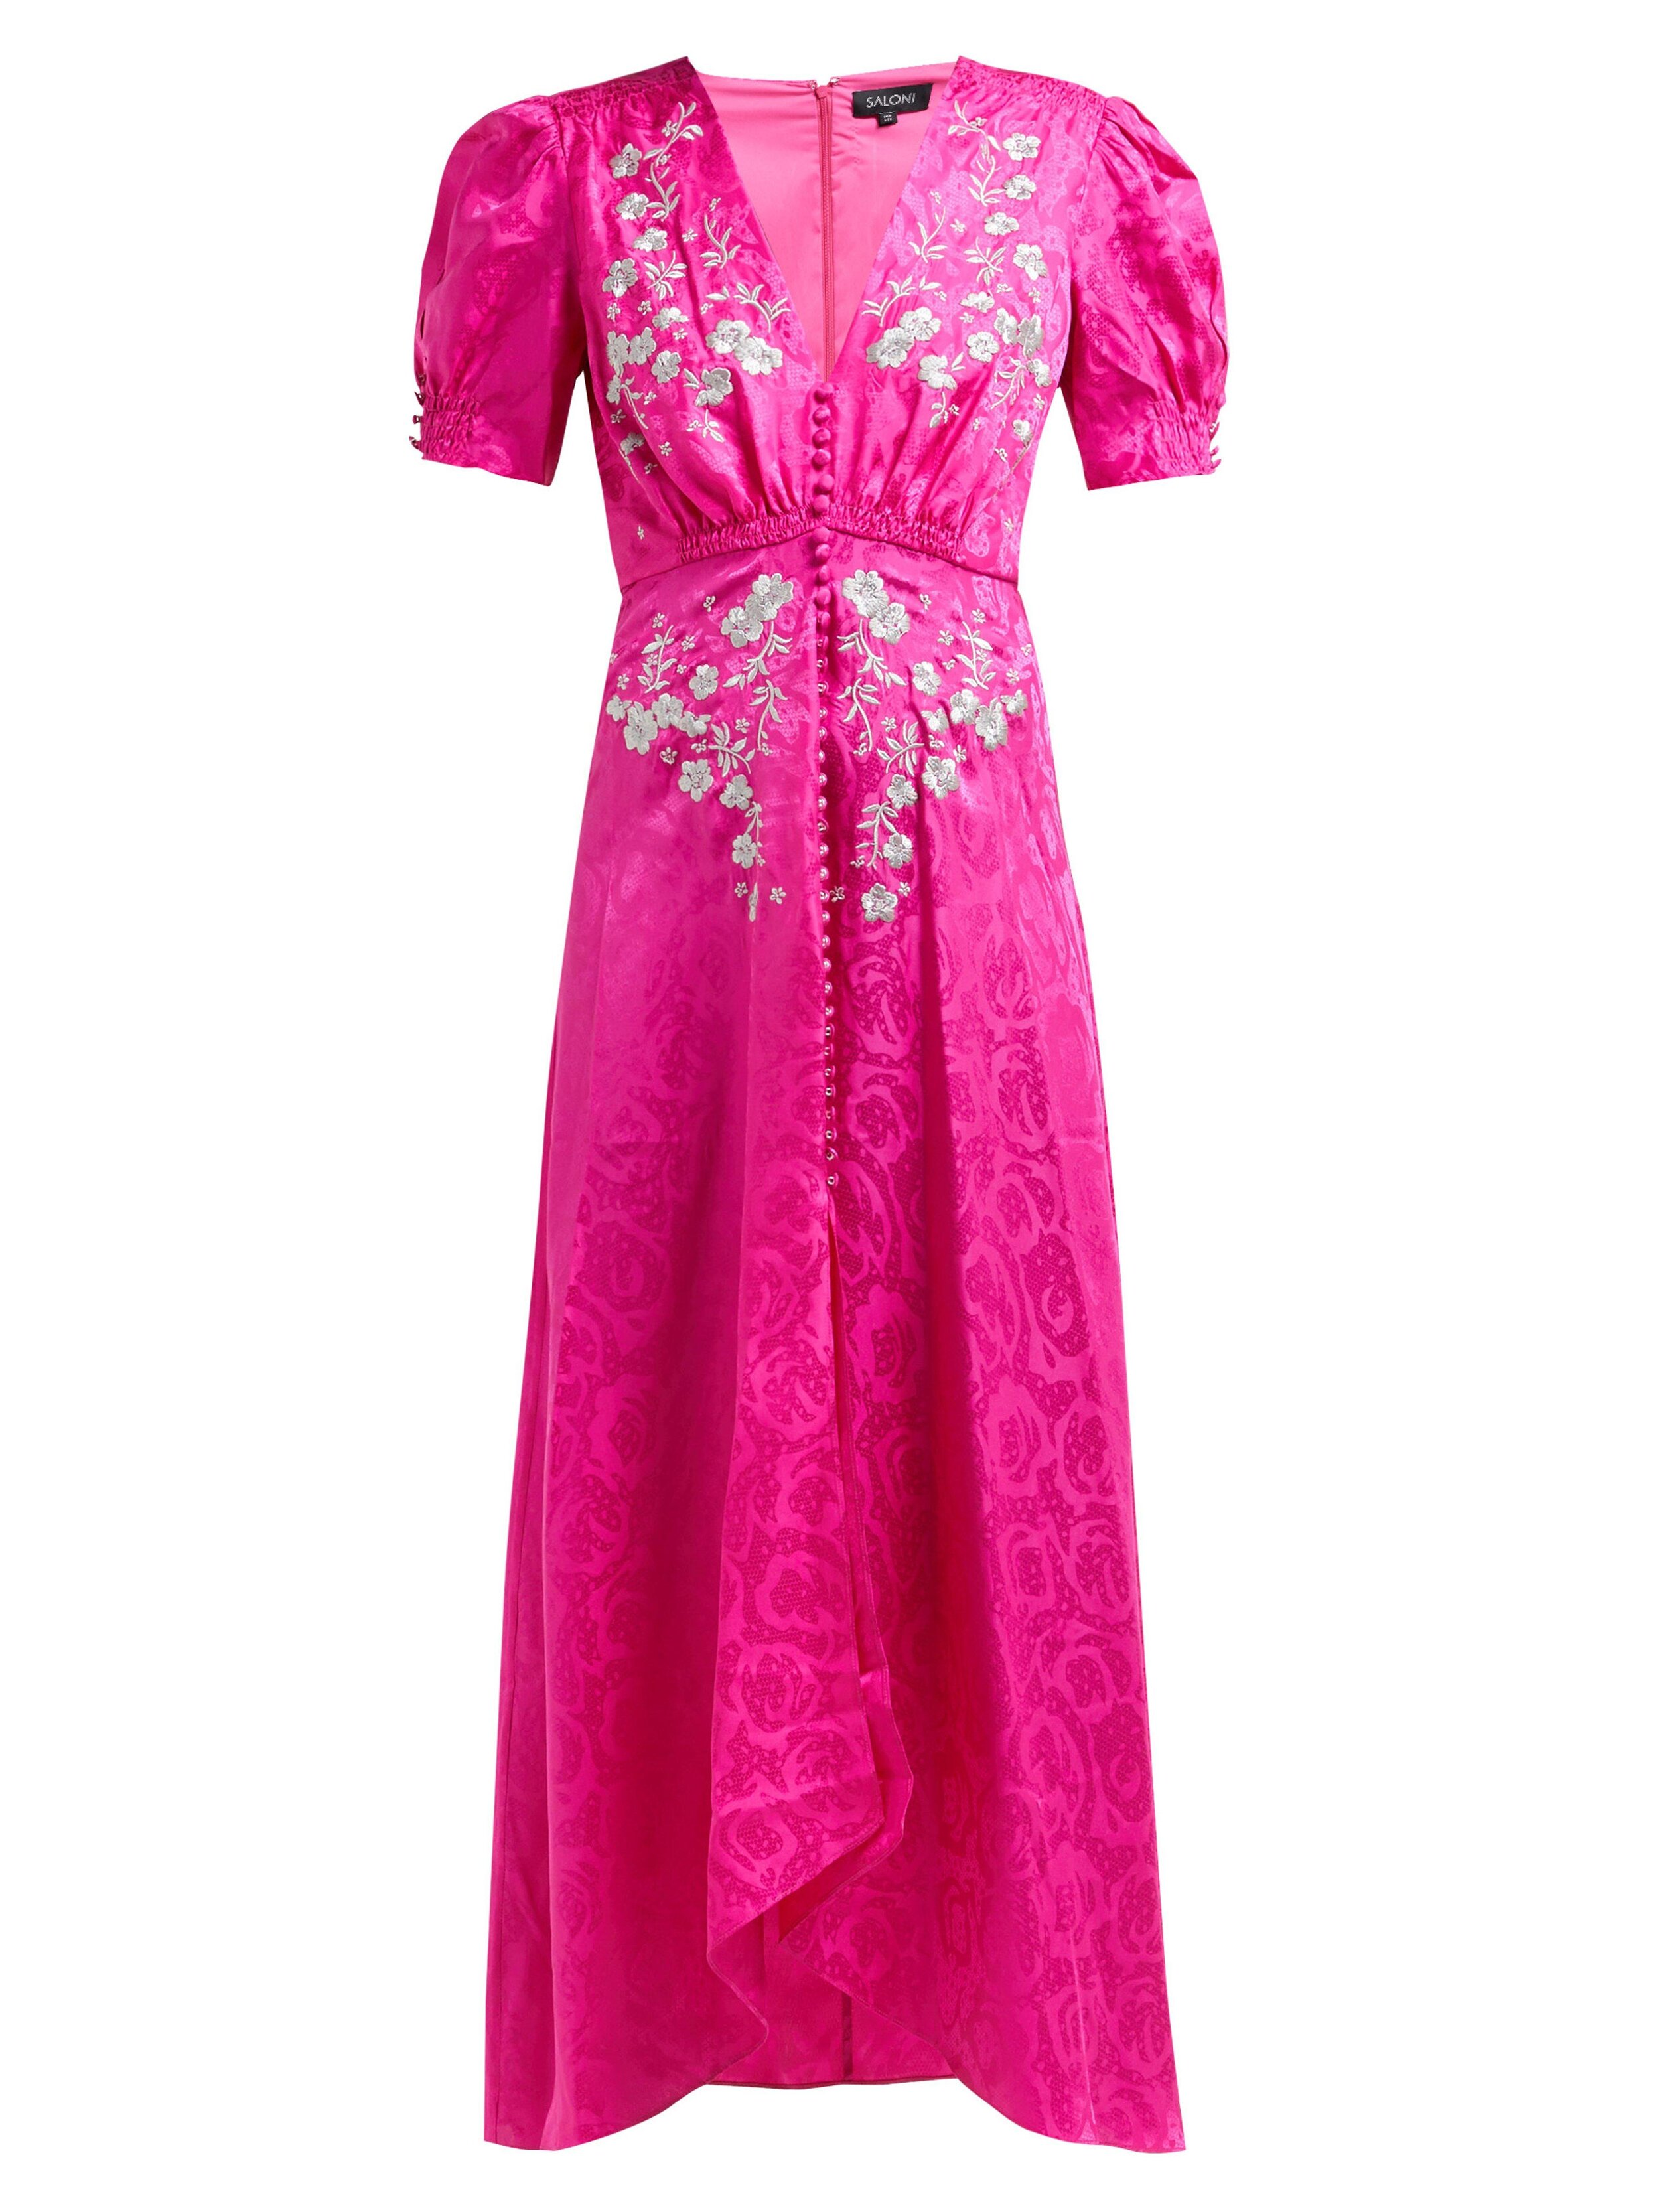 Saloni Lea Dress in Hot Pink with Silver Embroidery — UFO No More